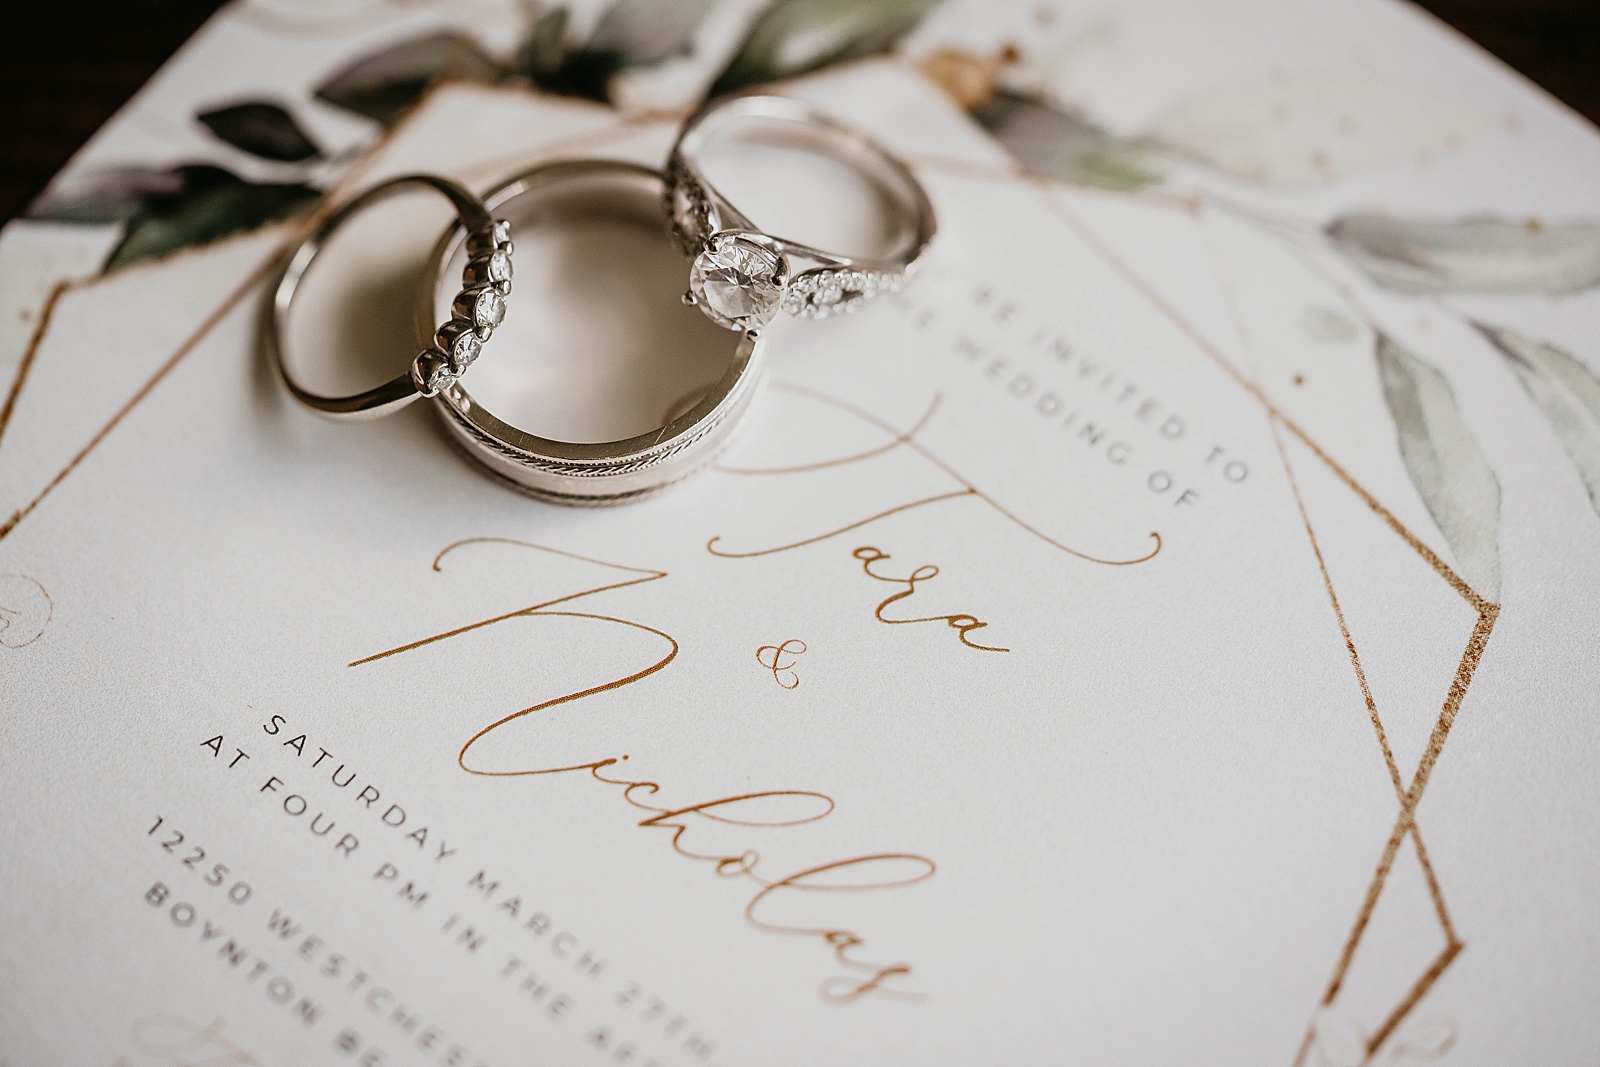 Detail shot of invitation engagement ring and wedding bands